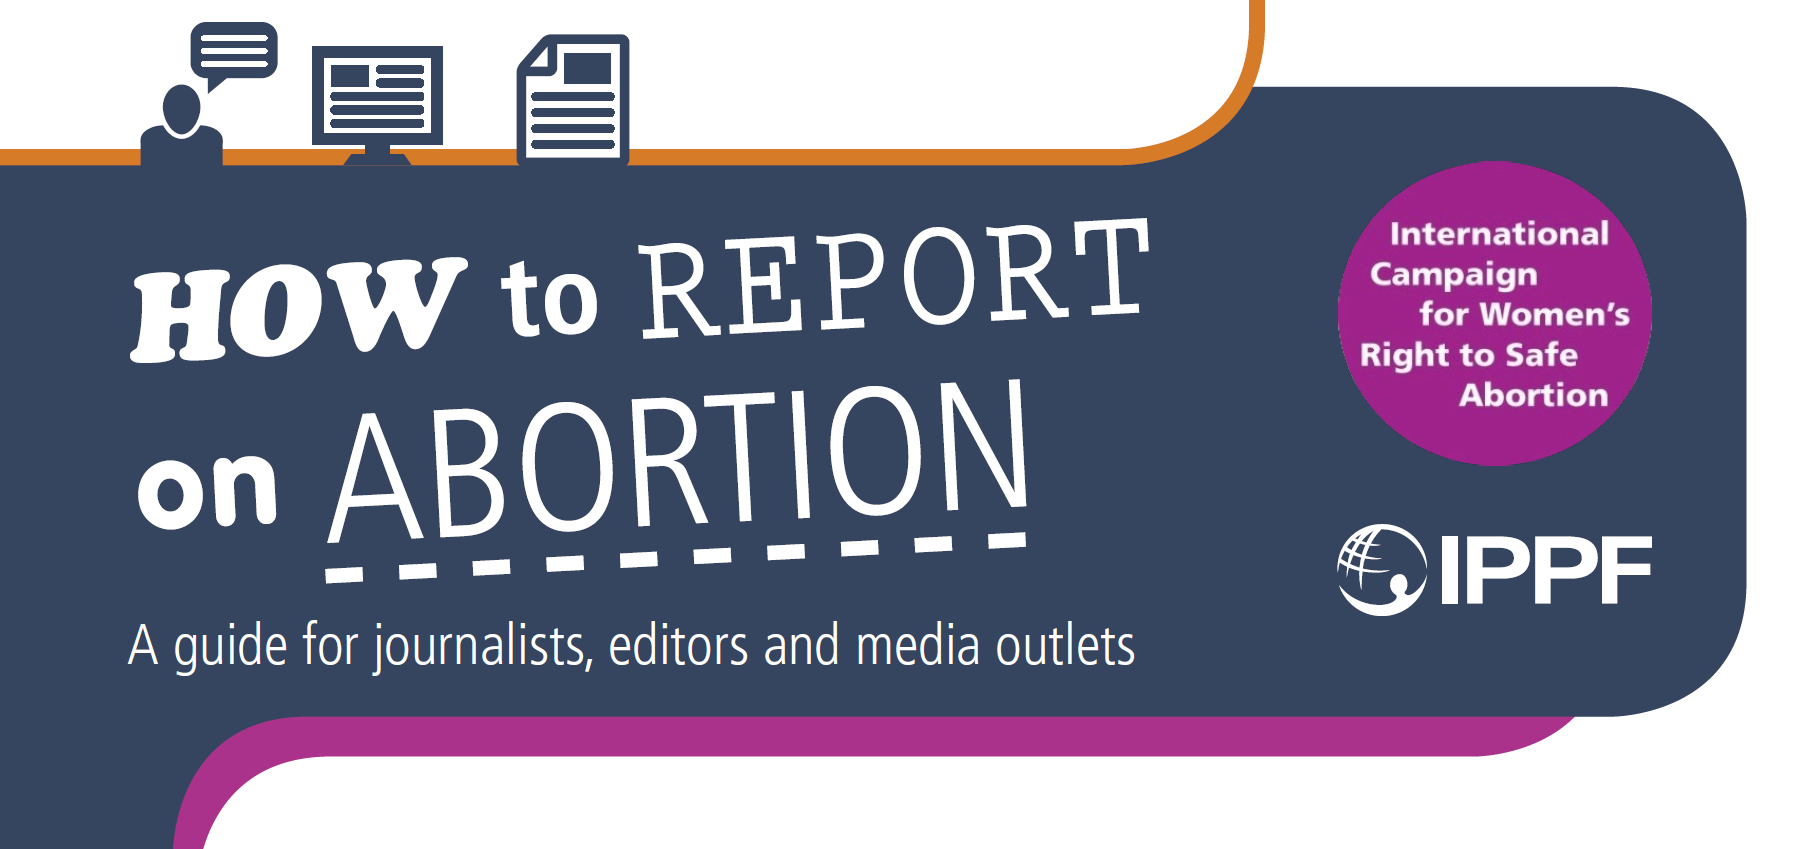 How to report on abortion - header 